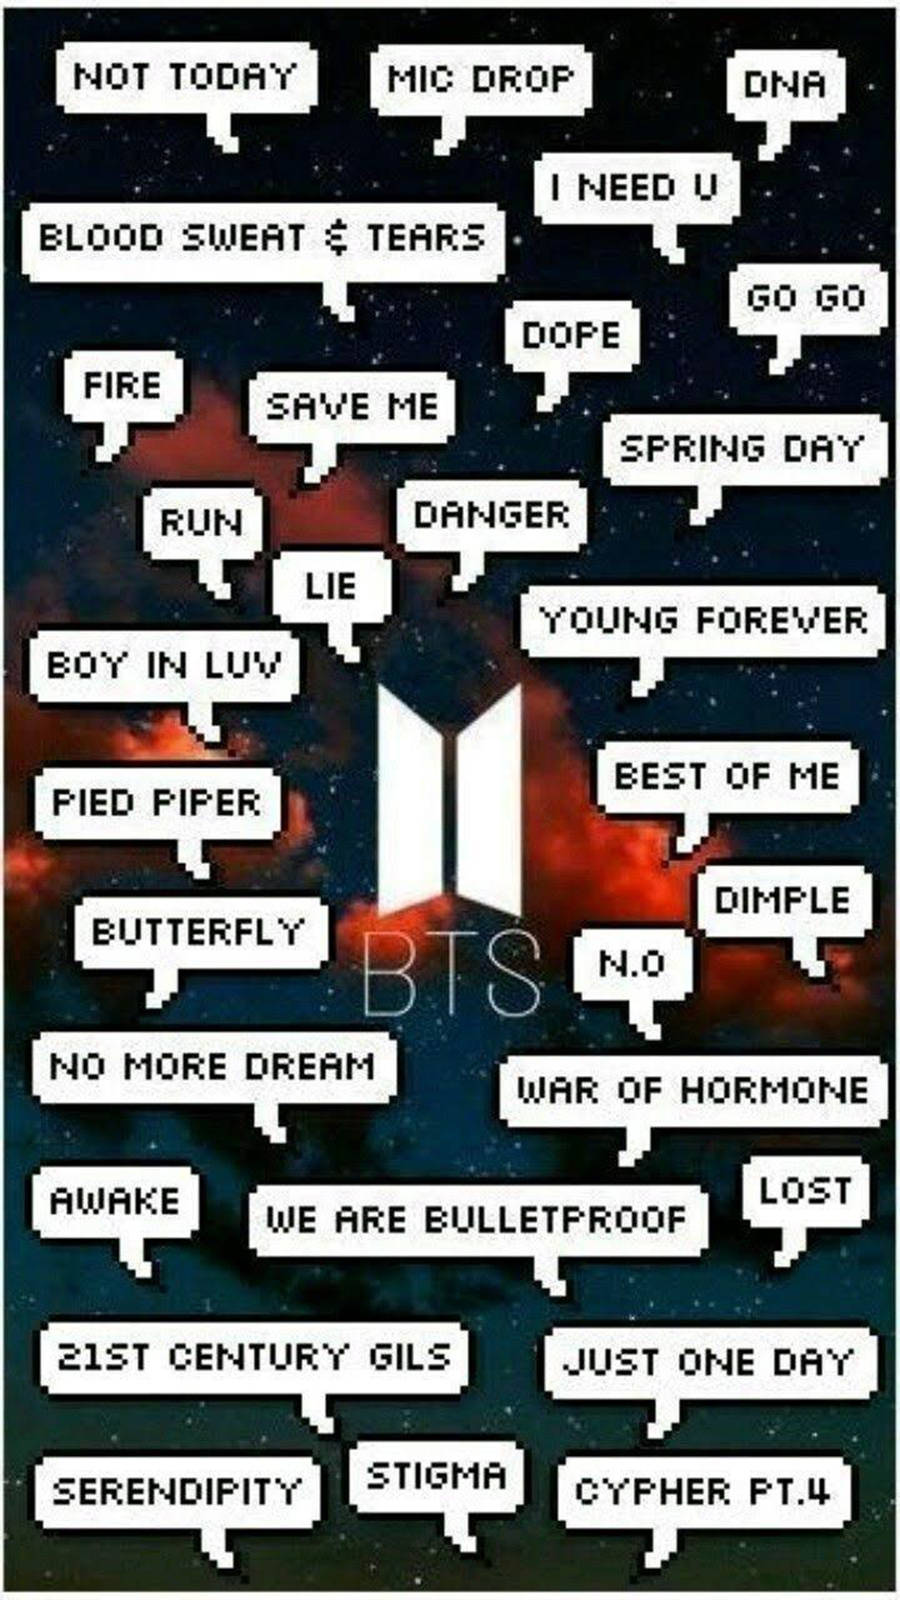 Bts Group Discography Aesthetic Wallpaper